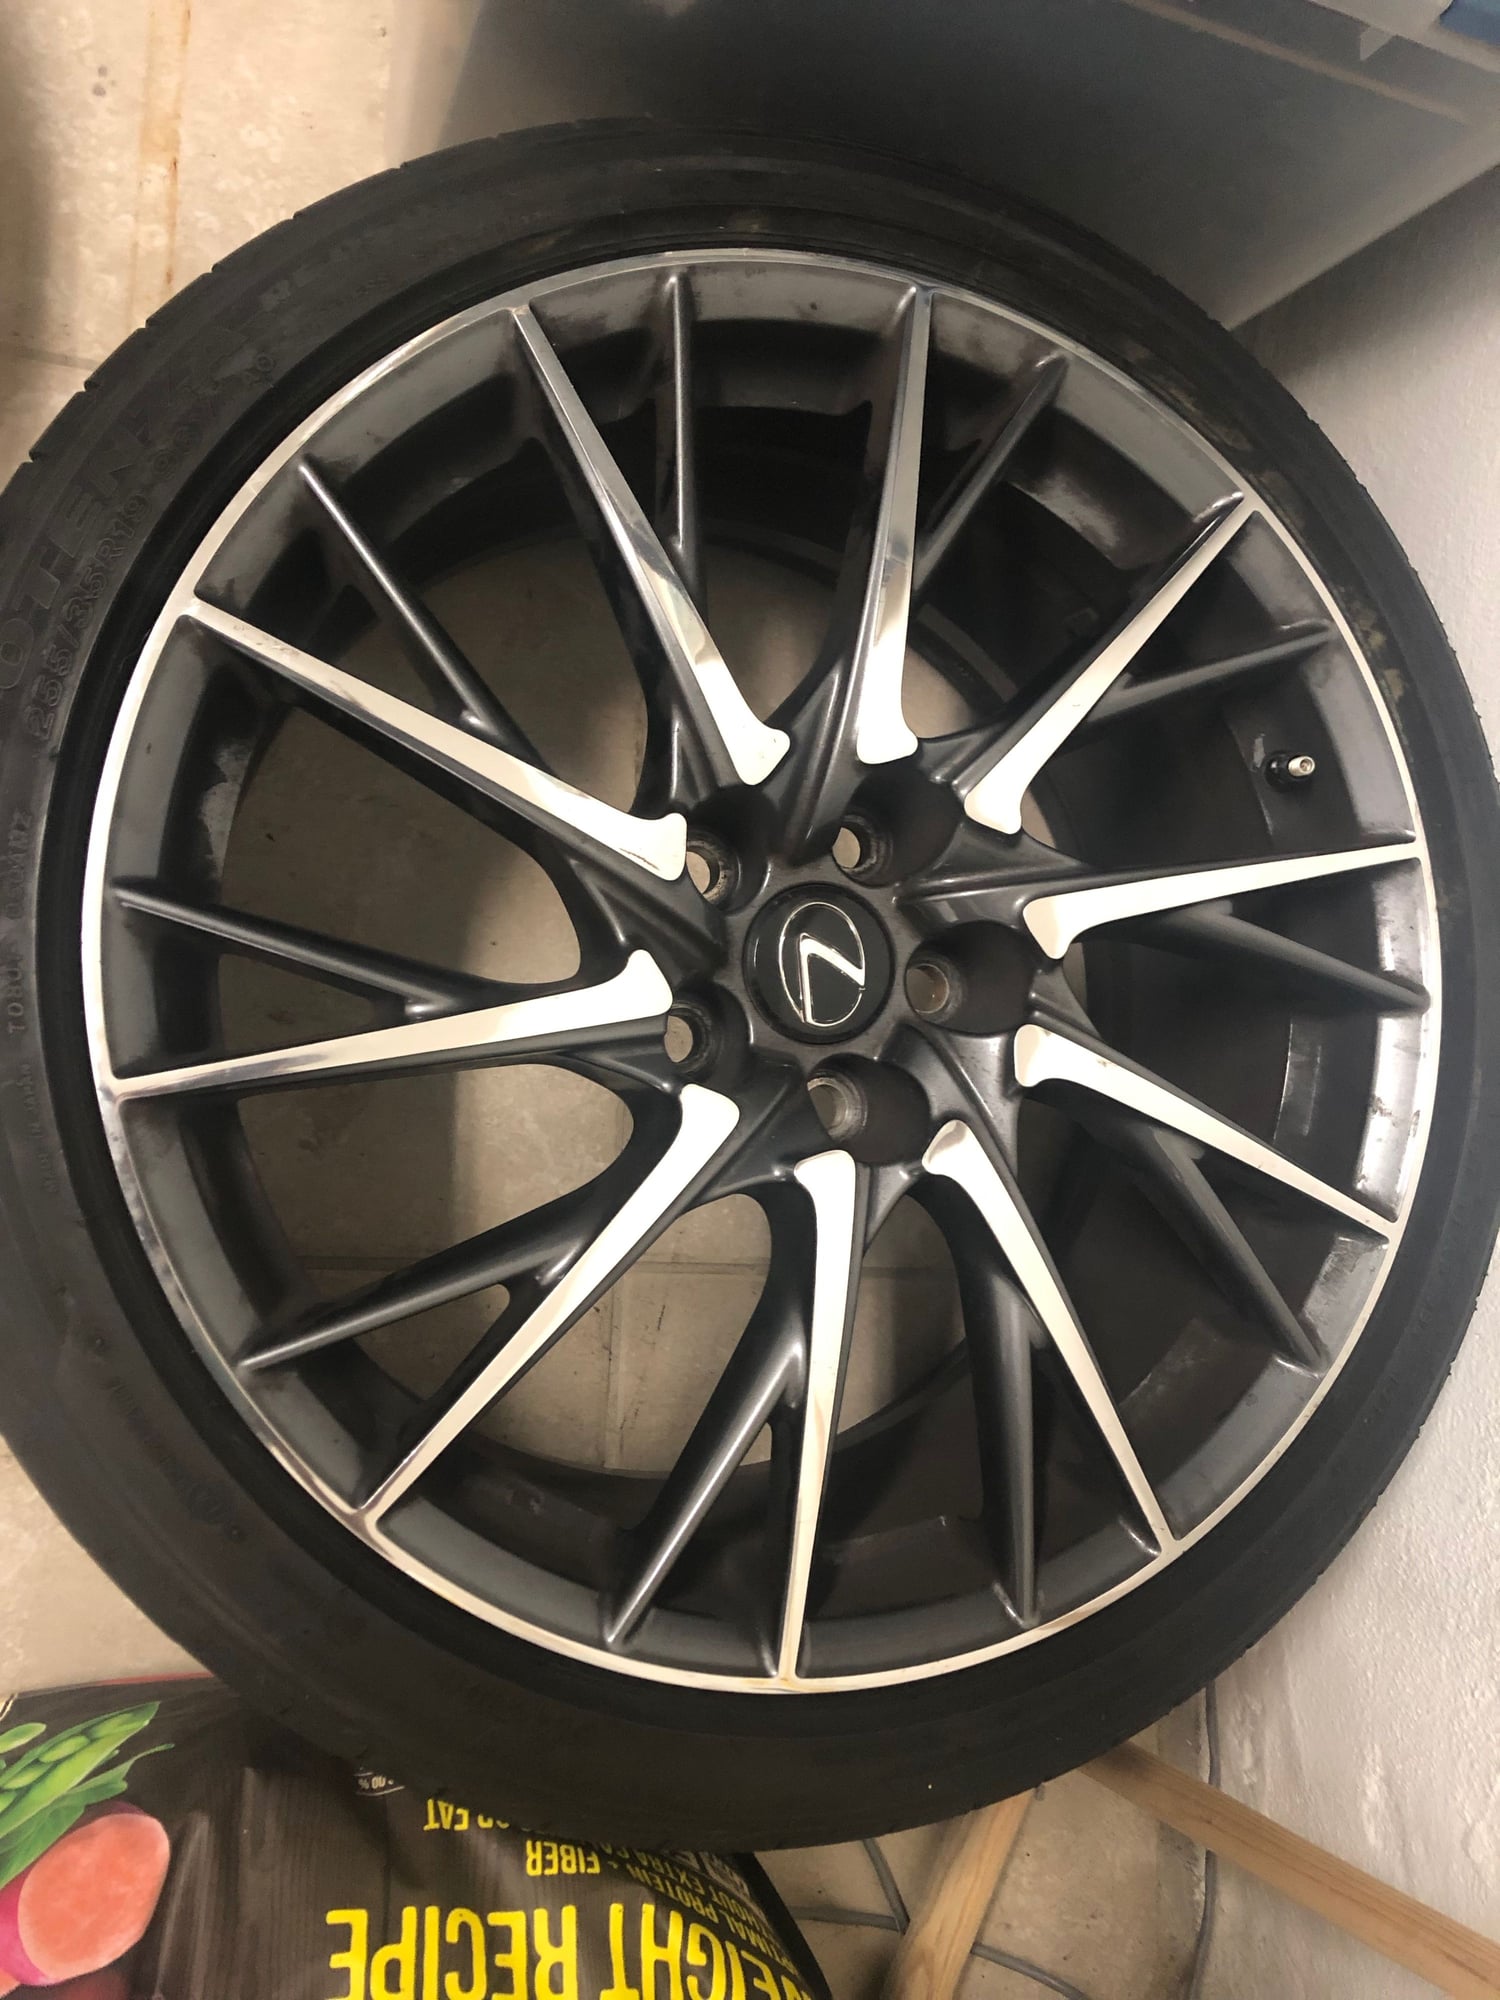 Wheels and Tires/Axles - 2015 lexus rcf wheels - Used - Miami, FL 33196, United States